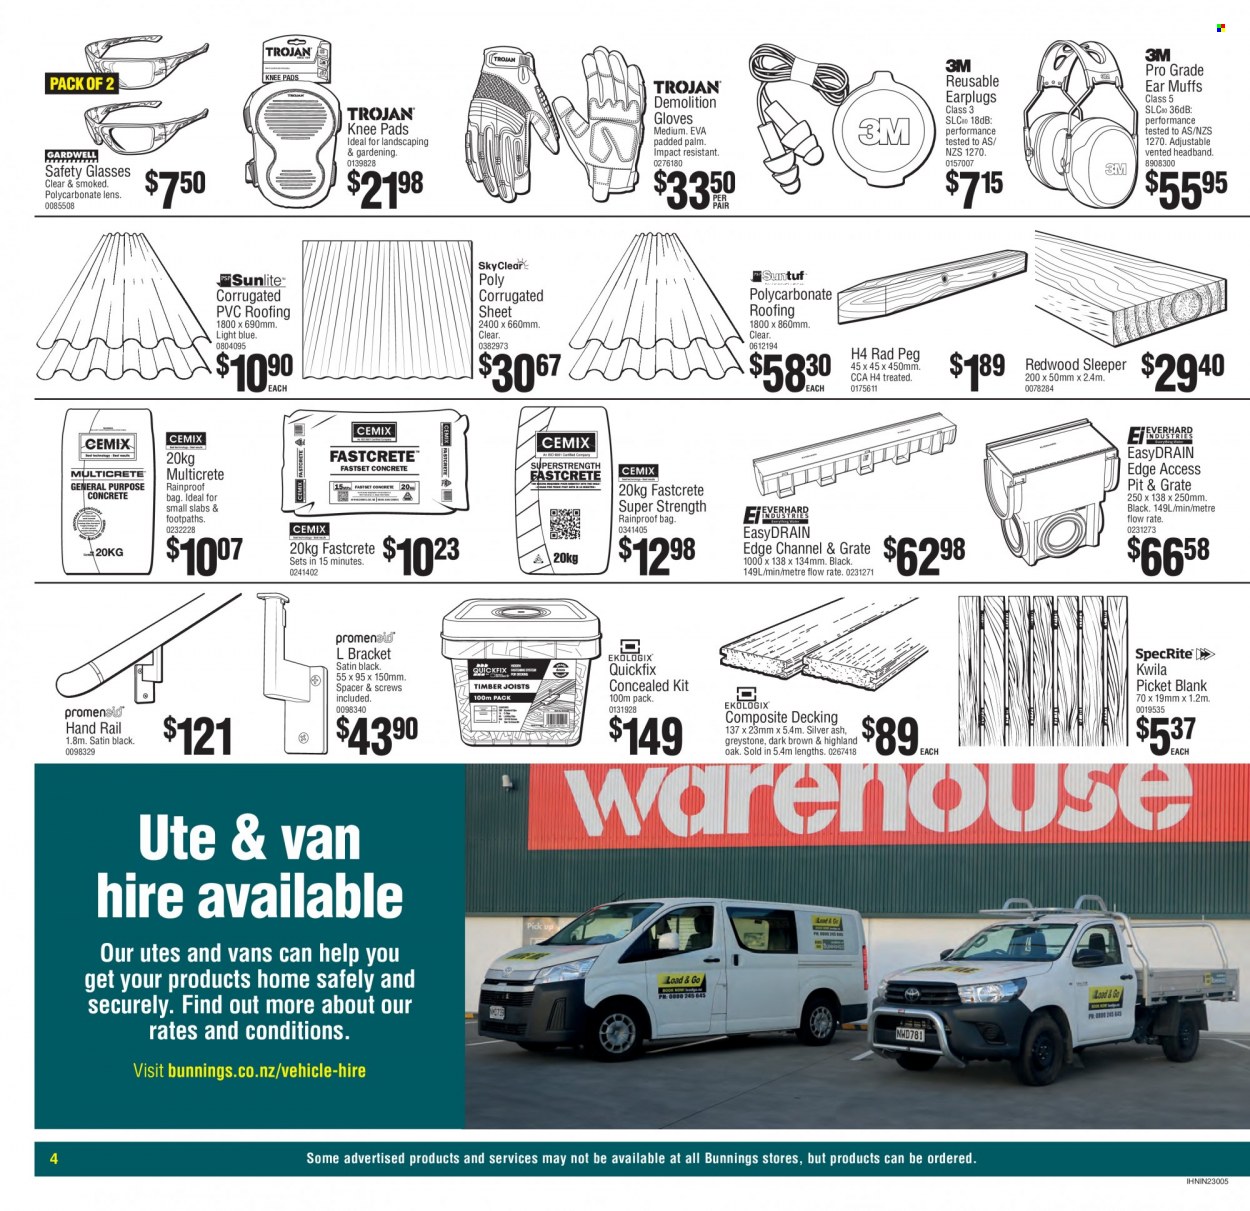 Bunnings Warehouse mailer . Page 4.